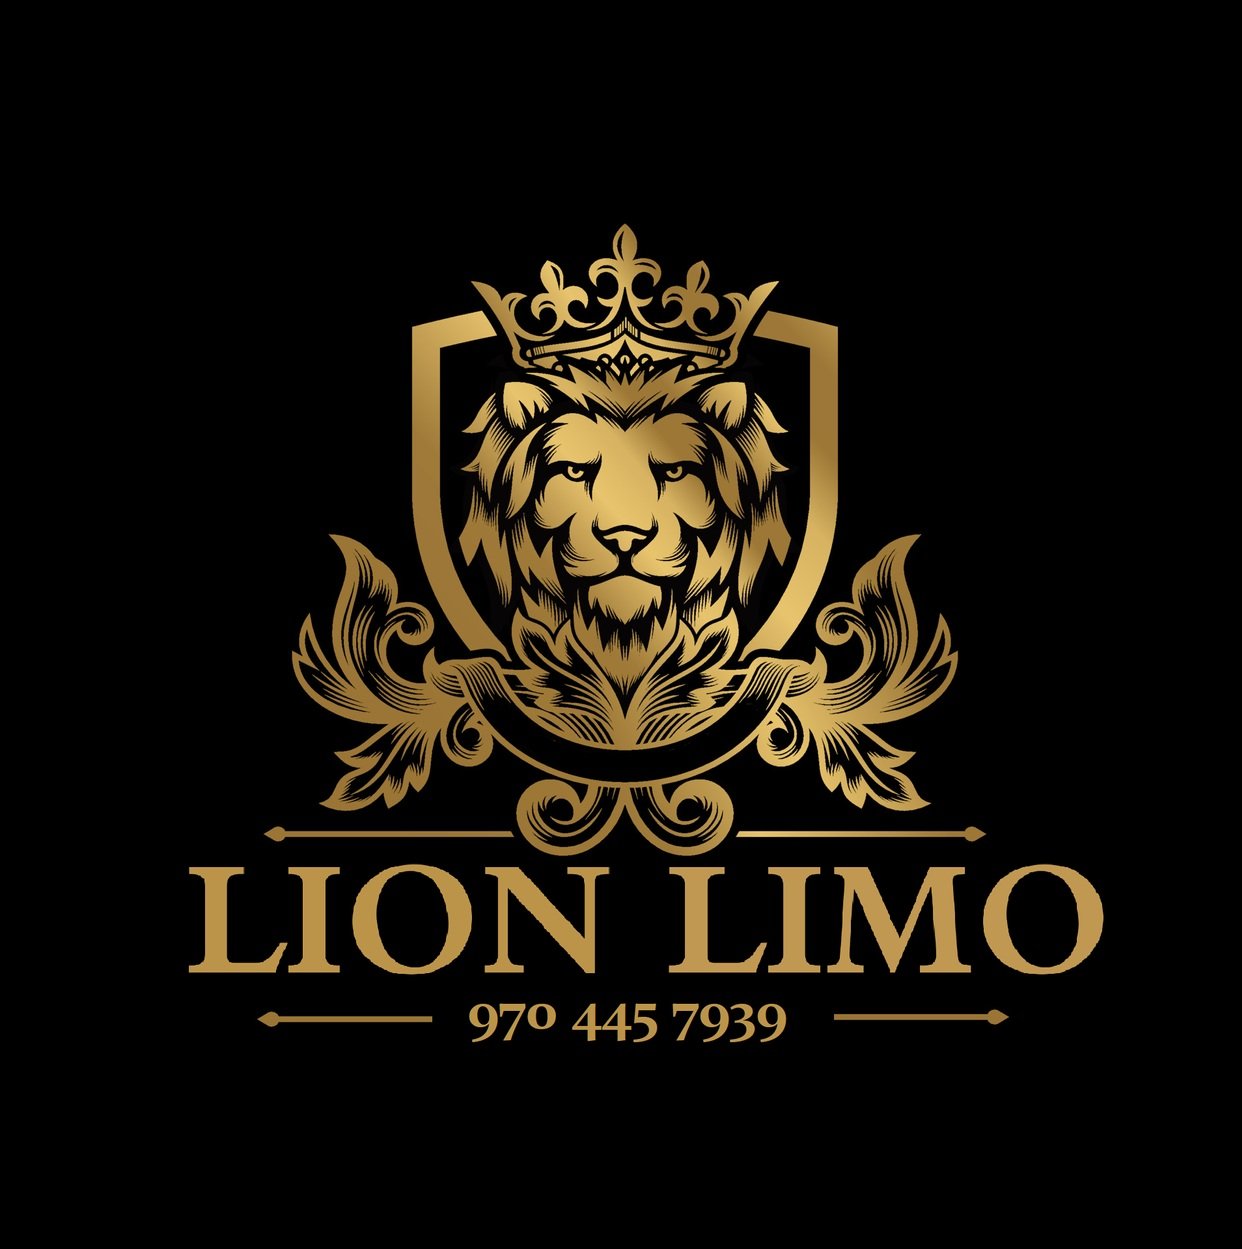 LionLimoVail